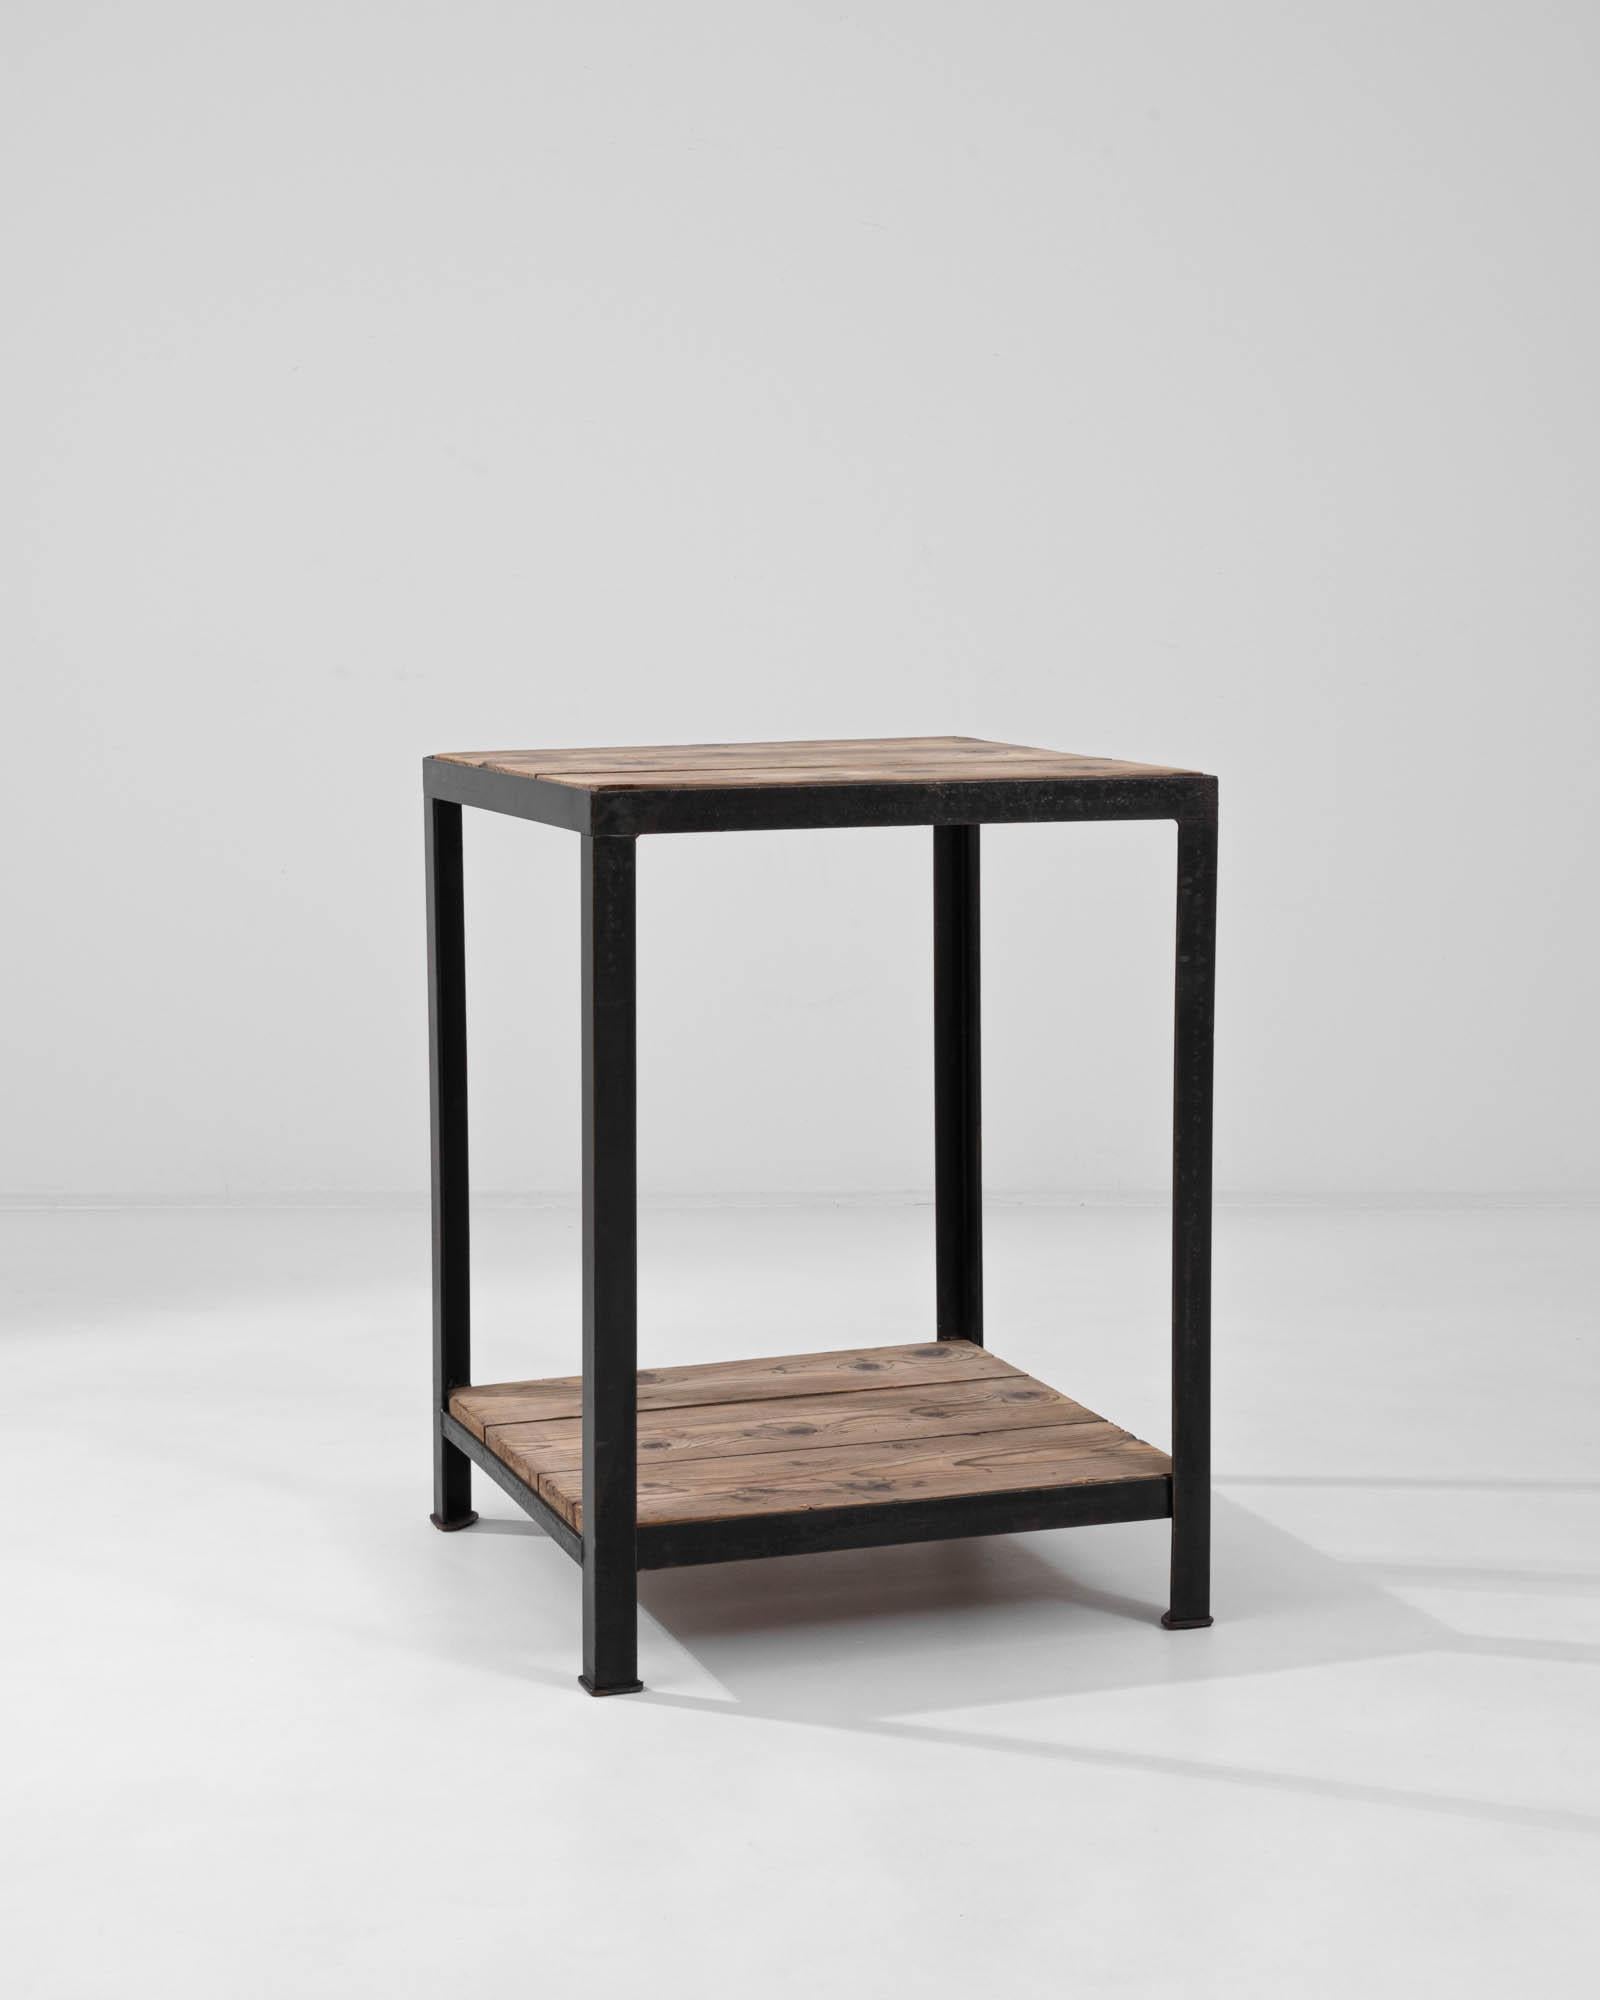 A vintage metal and wooden table from France. Constructed from square metal legs and brightly weathered wooden slats, this side table is infused with an industrial edge. A lushly colored framework of metal encases a bright tabletop and its lower